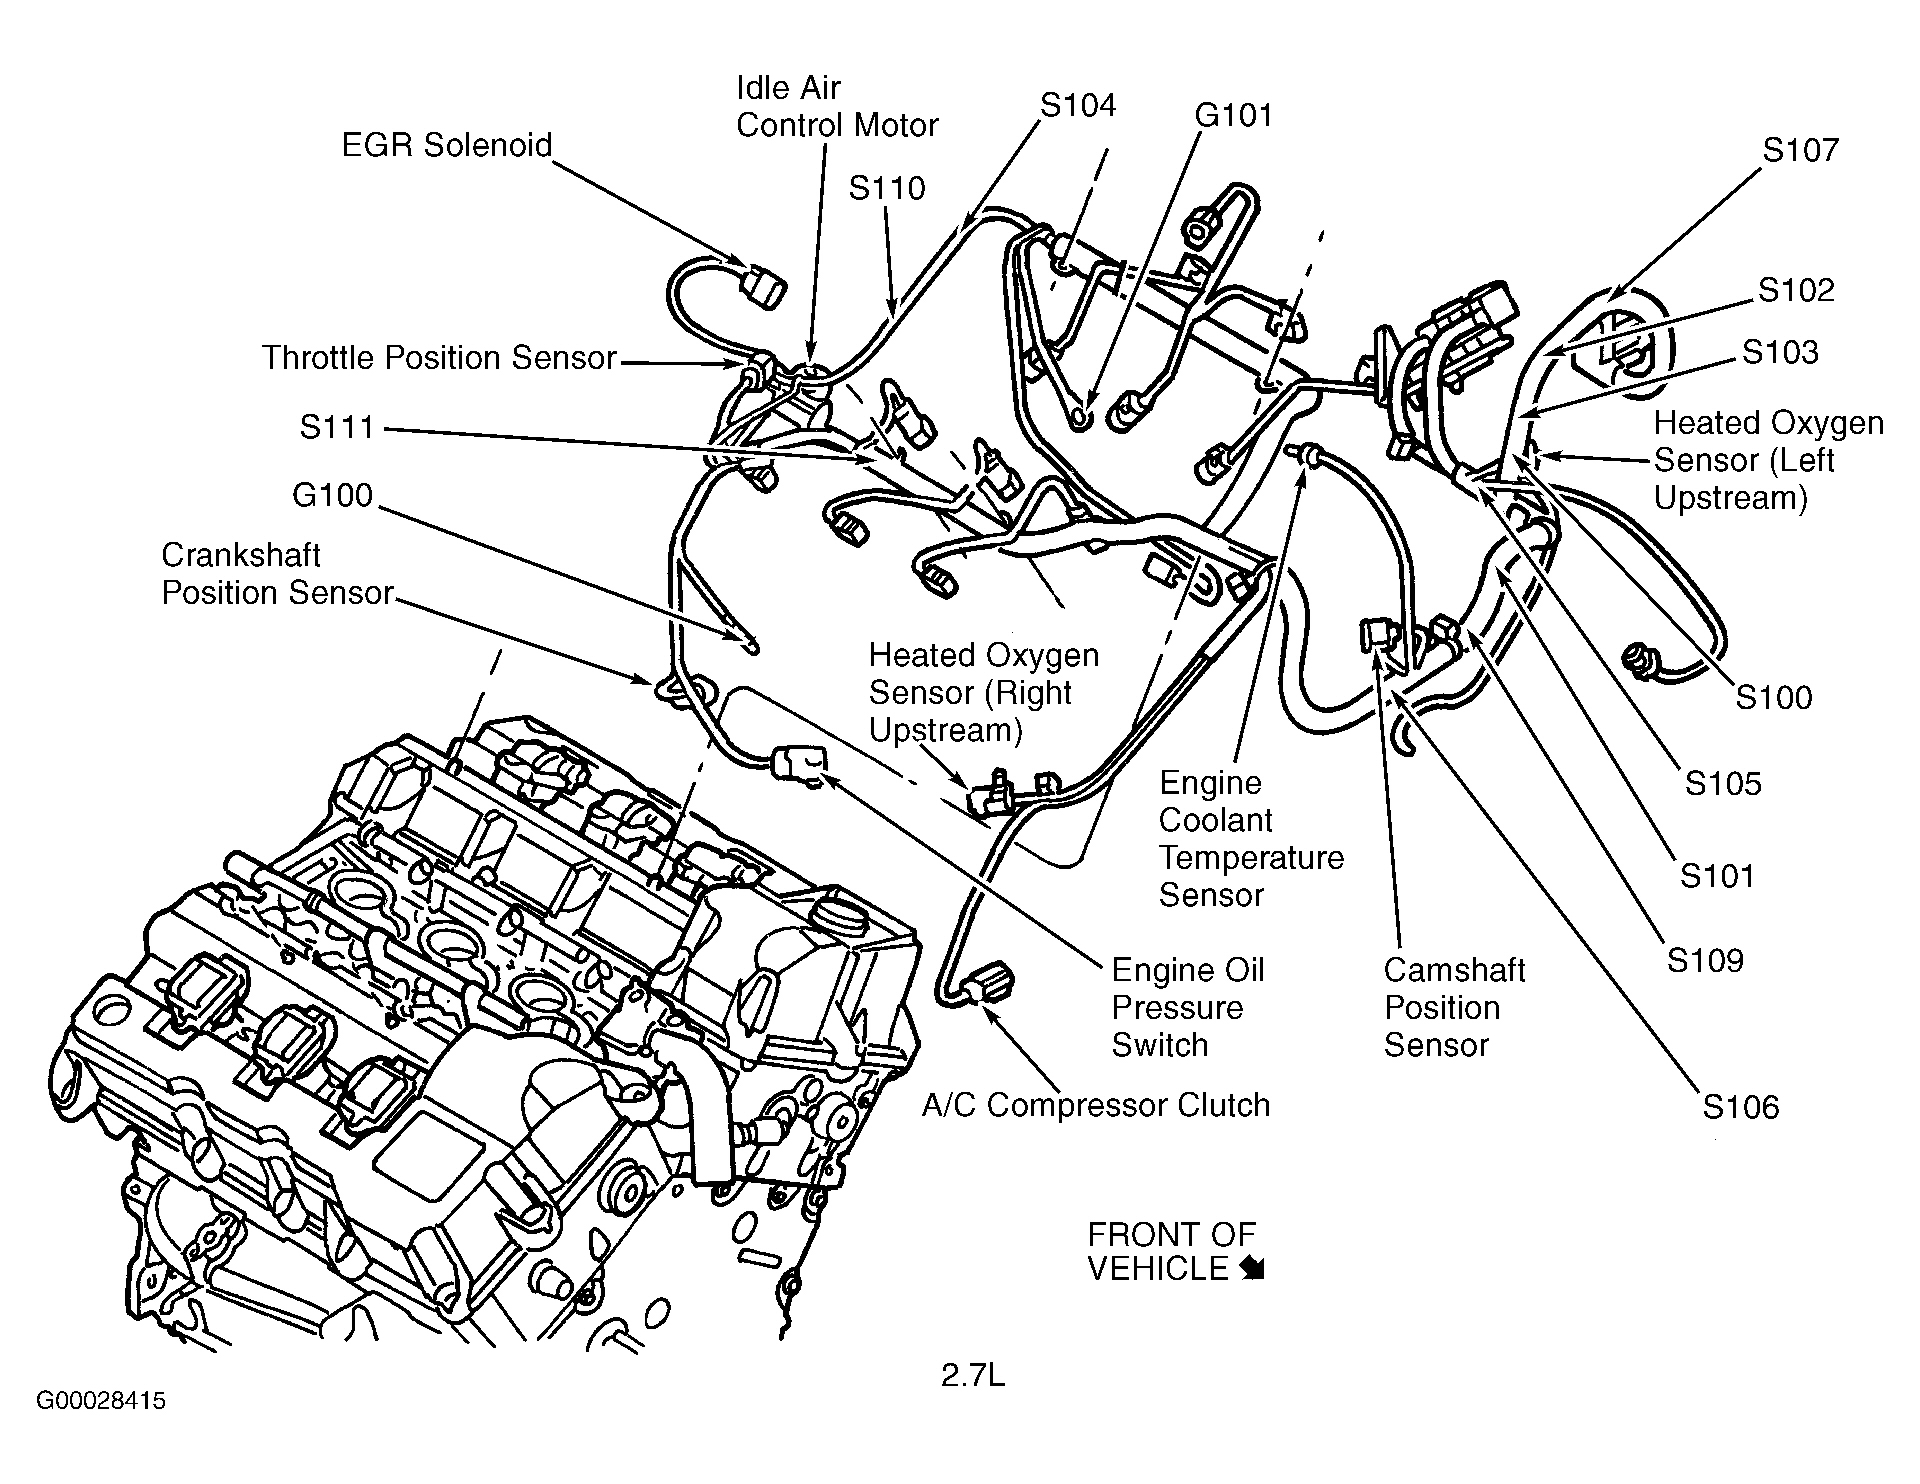 Dodge Intrepid 2000 - Component Locations -  Top Of Engine (2.7L)